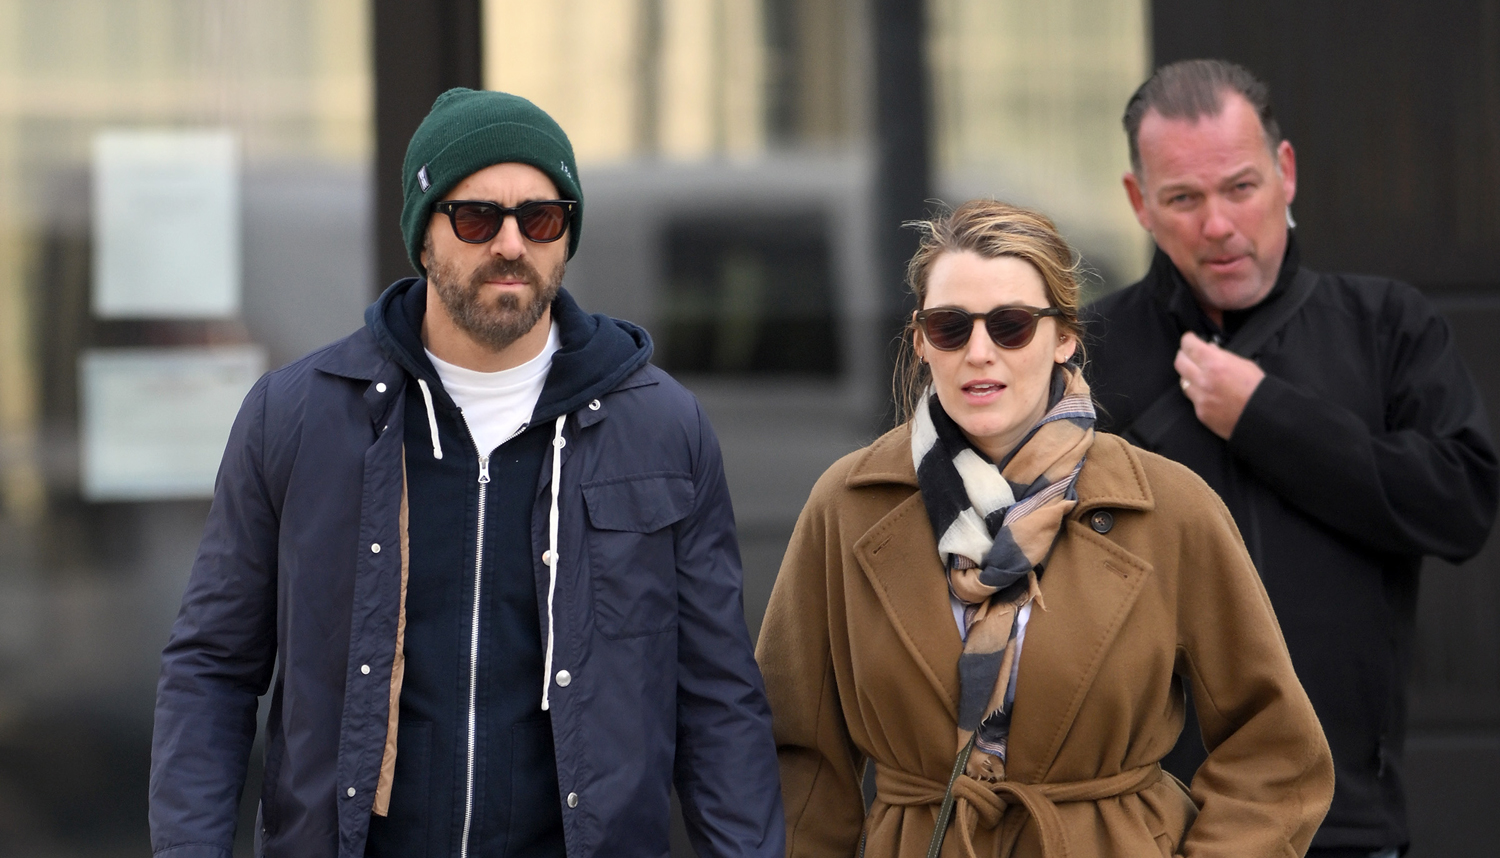 Blake Lively & Ryan Reynolds Hold Hands During Rare NYC Sighting – See Photos!